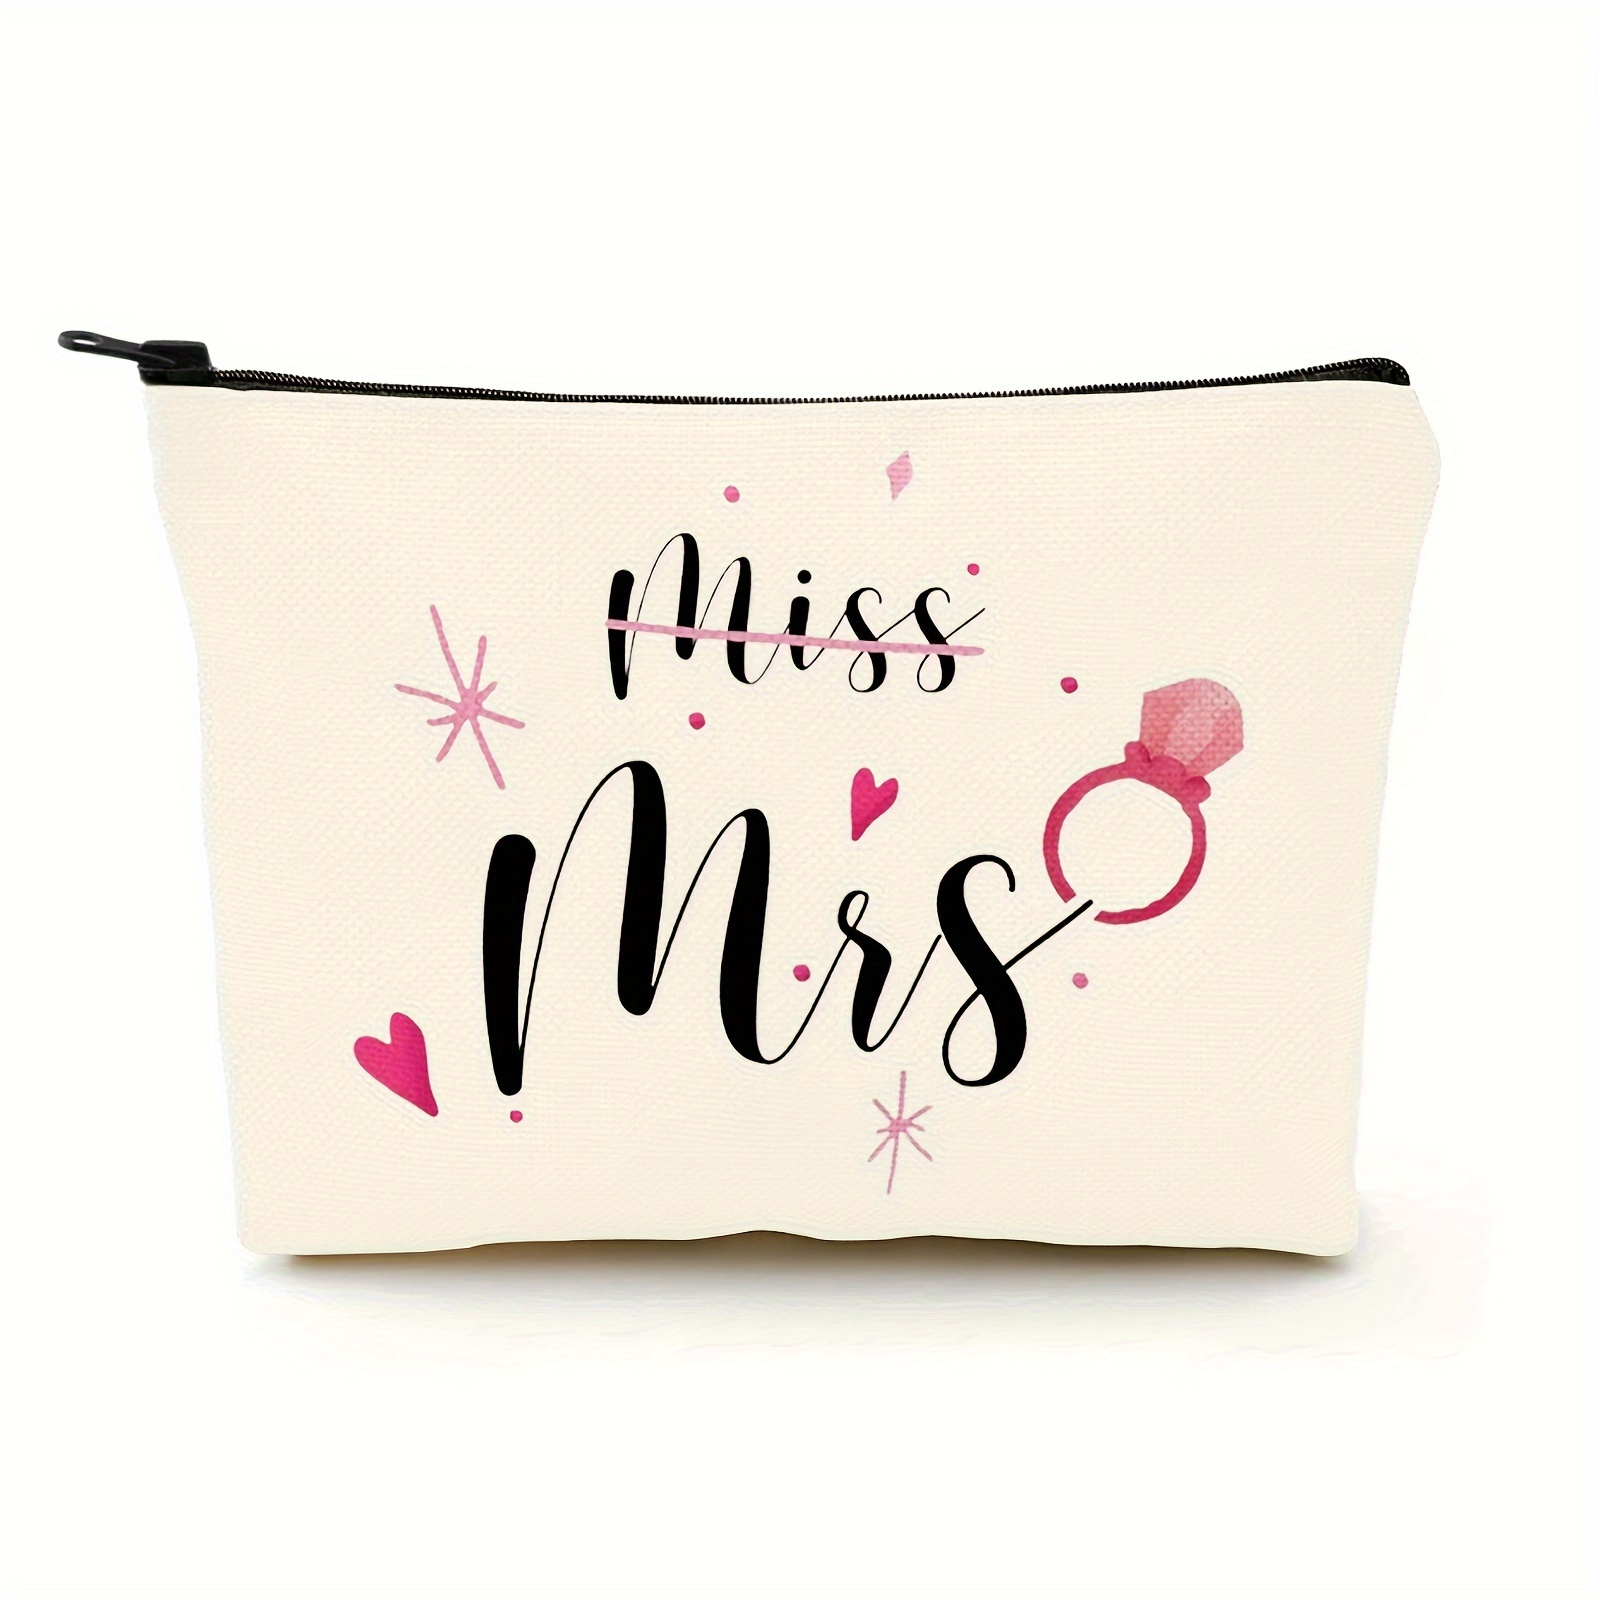 Bridal Shower Gifts Bachelorette Gifts Bachelorette Party Favors Wedding Gifts Engagement Gifts Bride Gifts Bride Makeup Bag Miss to Mrs Bride to Be